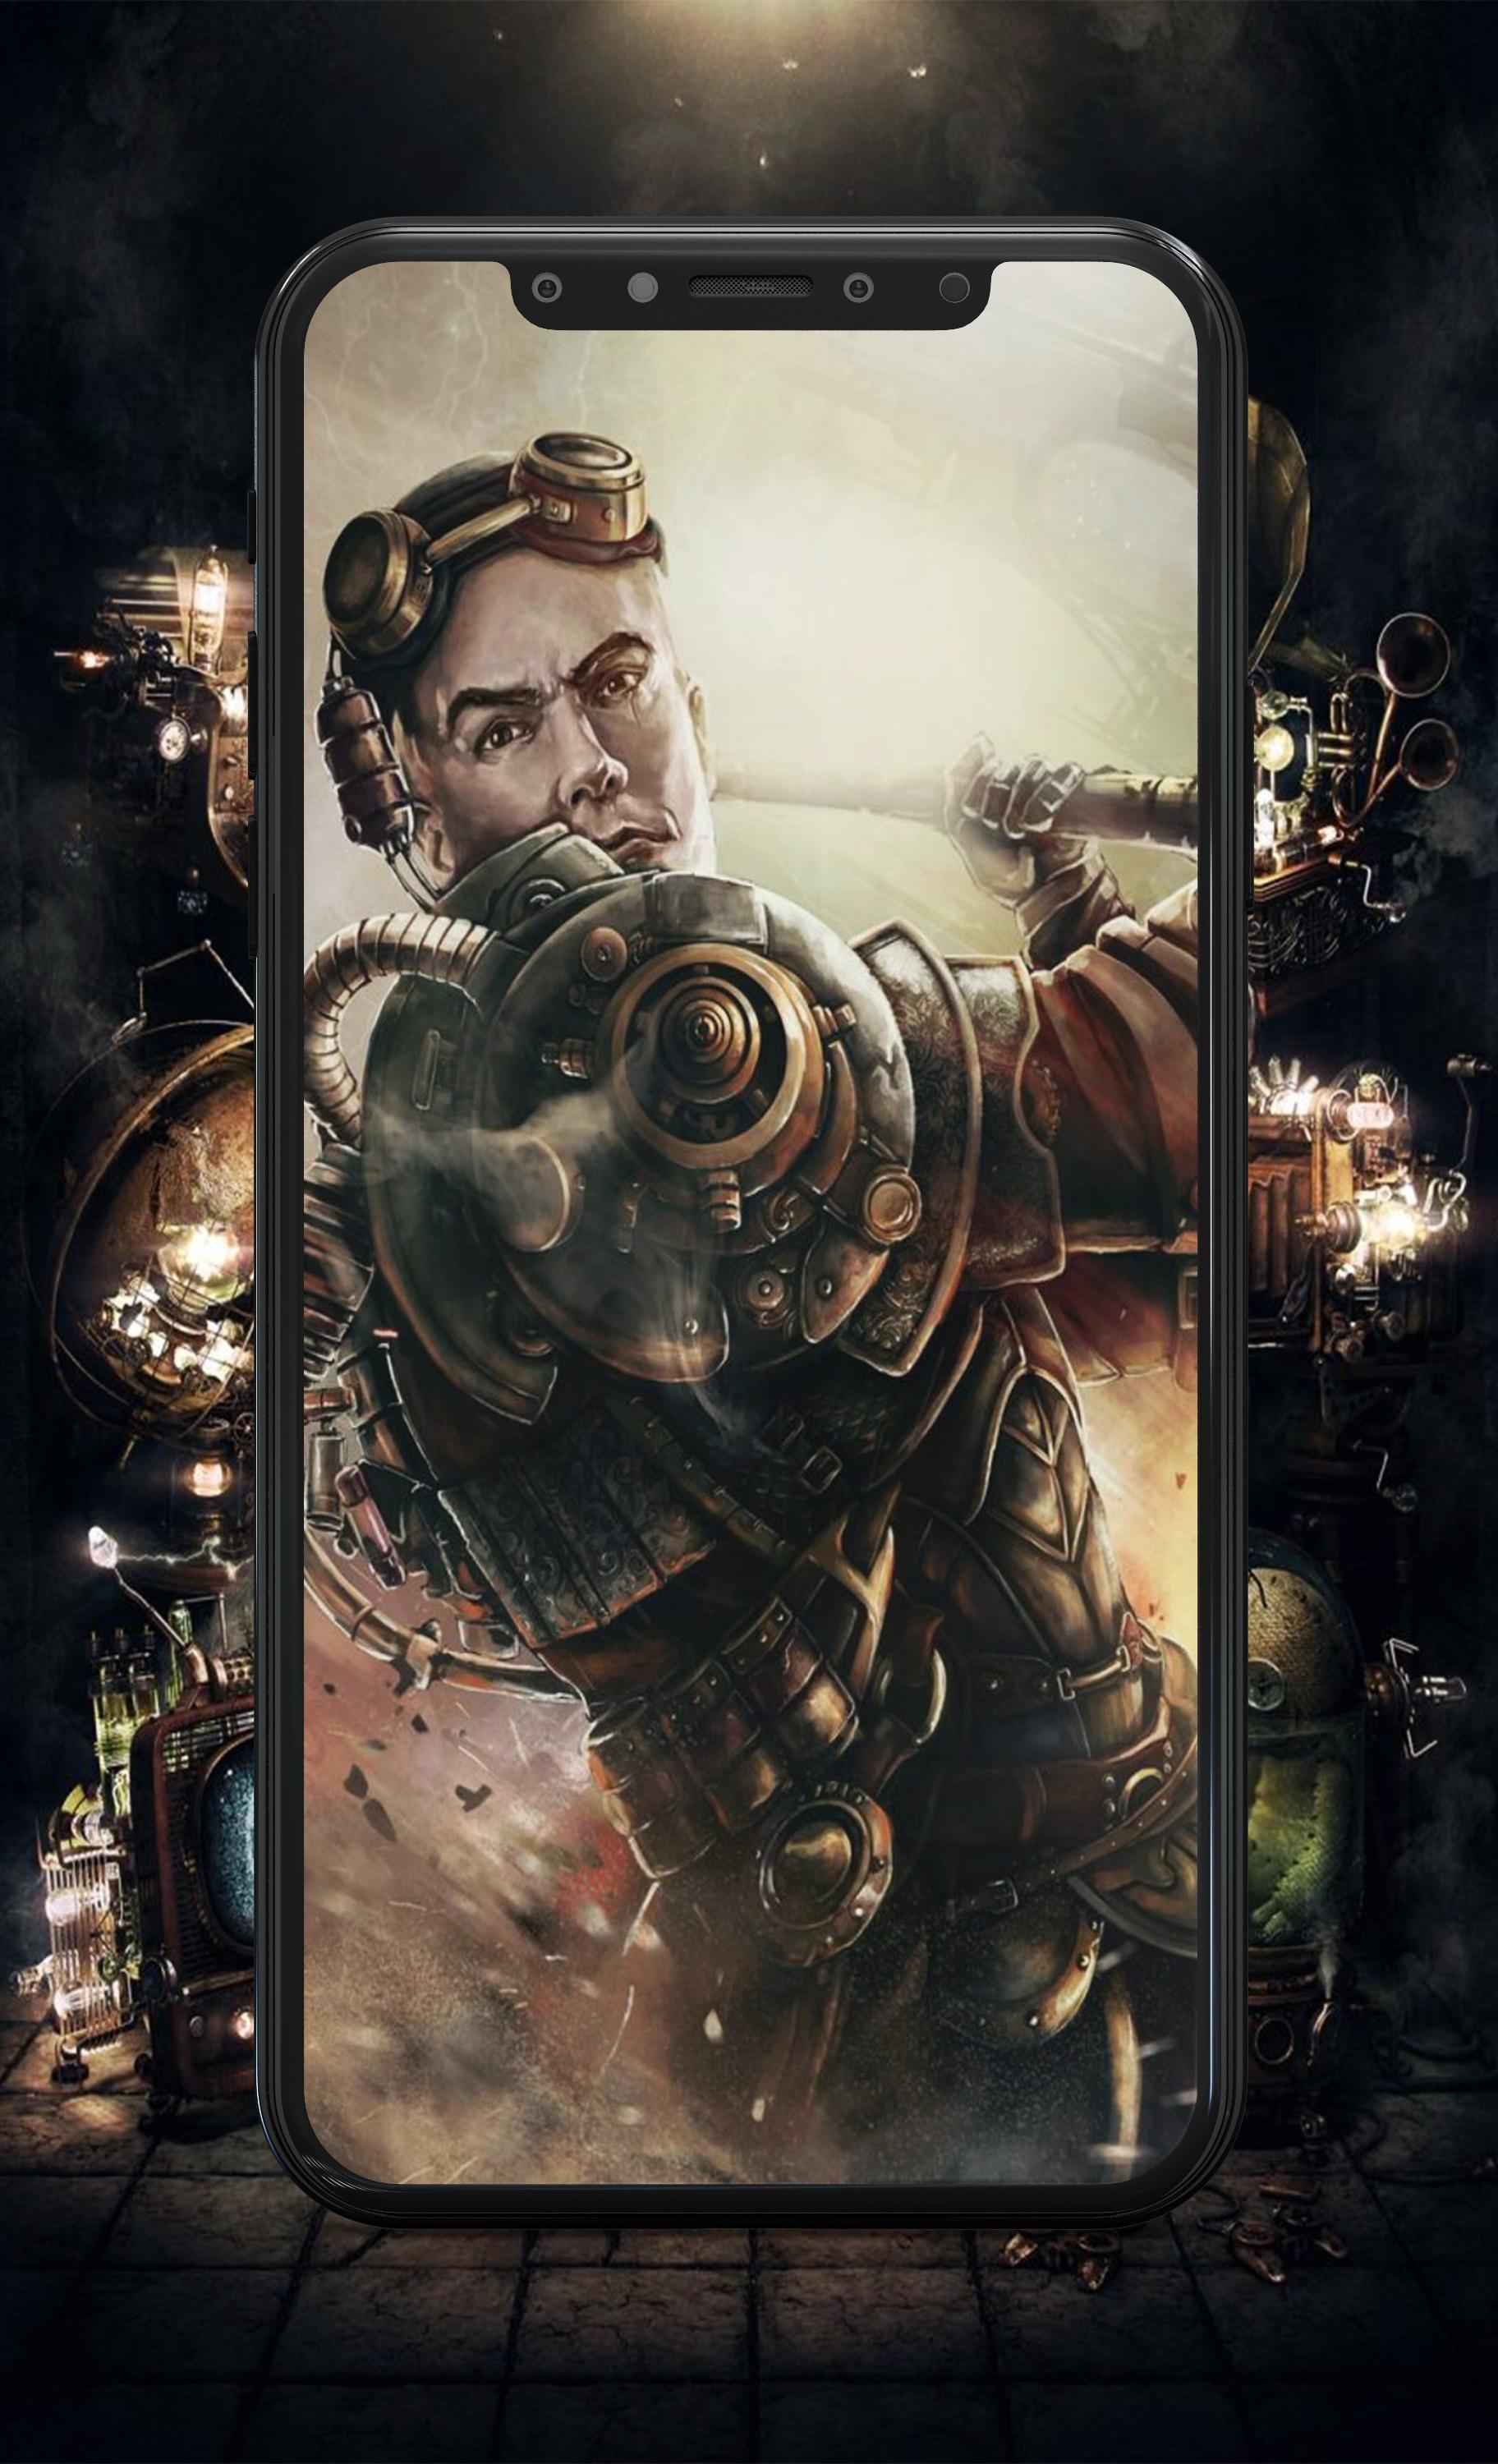 Steampunk Engine Wallpaper For Android Apk Download See more ideas about steampunk wallpaper, steampunk, wallpaper. steampunk engine wallpaper for android